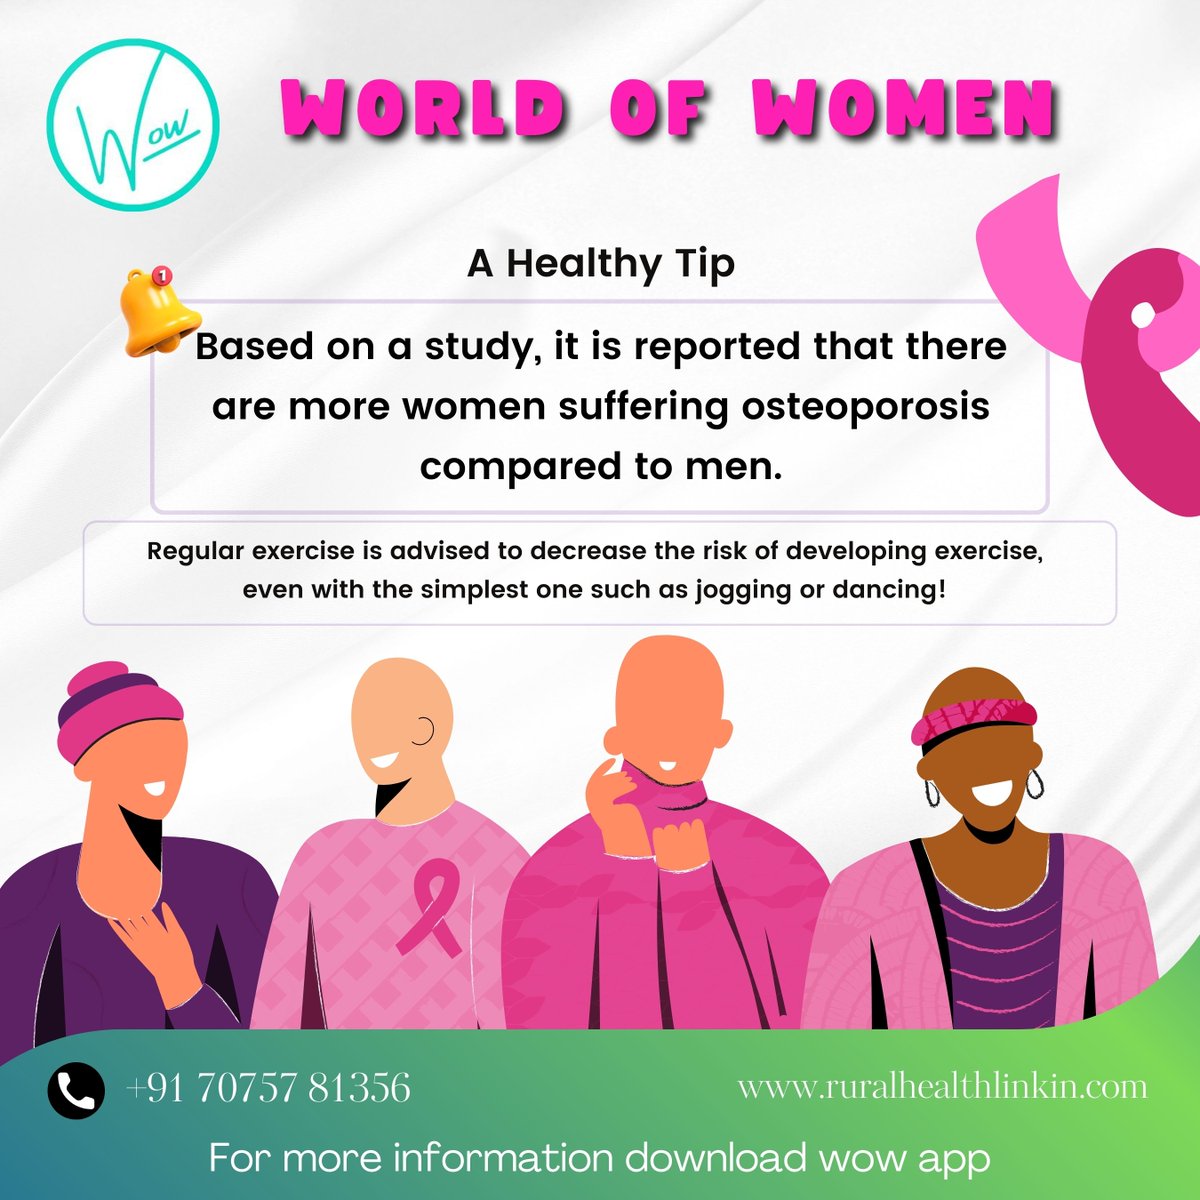 🌟 Discover the WOW - World of Women App! 📲✨ Your ultimate wellness companion tailored specifically for women's needs. #WOWApp #WomenEmpowerment #HealthJourney #TransformYourHealth #DownloadNow